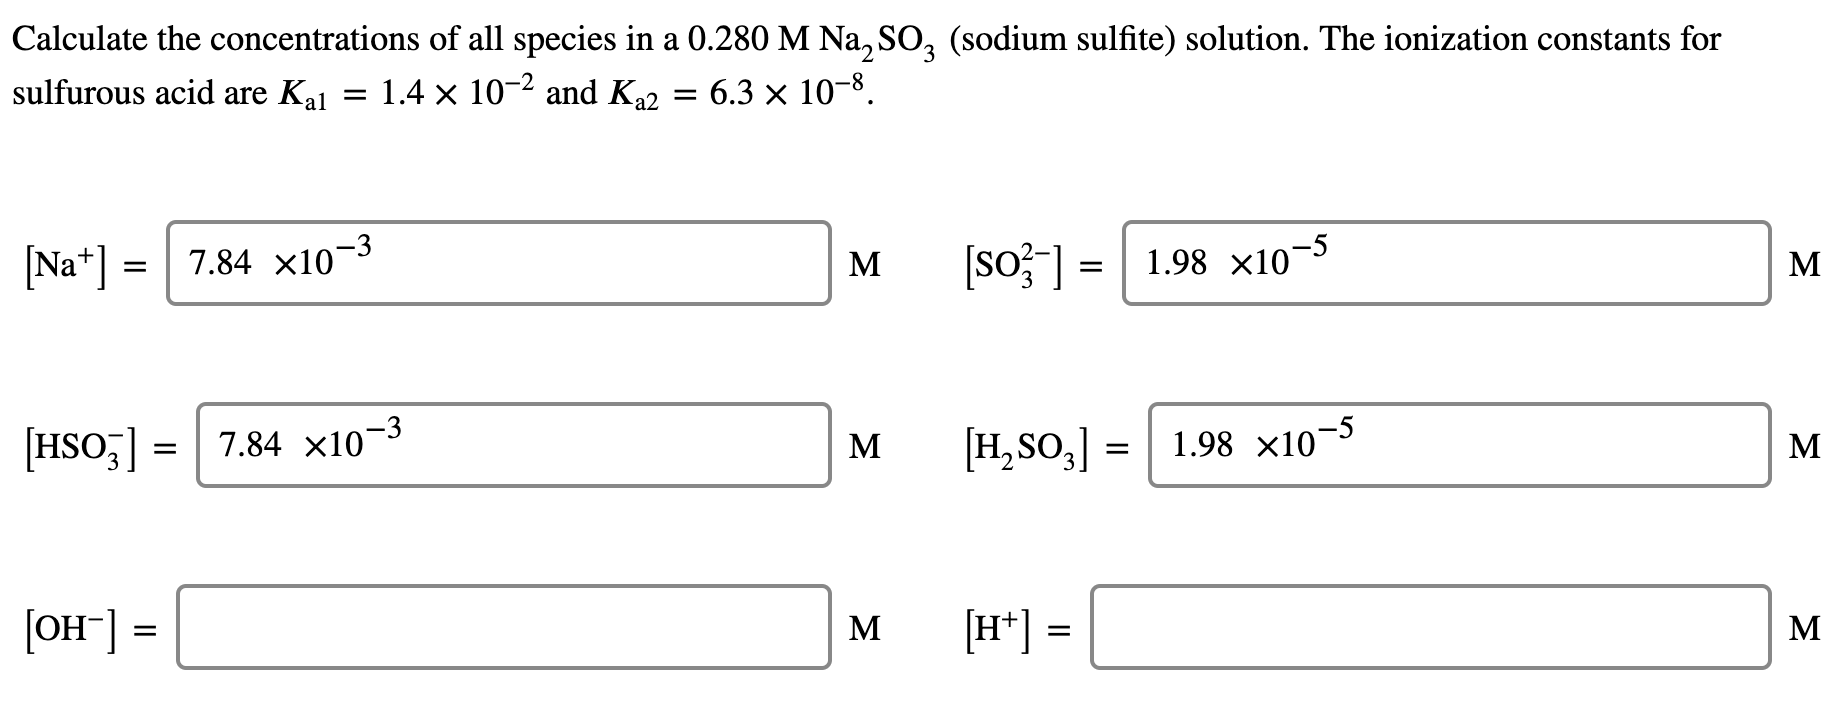 Calculate the concentrations of all species in a 0.280 M Na, SO, (sodium sulfite) solution. The ionization constants for
sulfurous acid are Kal
1.4 x 10-2 and K22 = 6.3 × 10-8.
[Na*] =| 7.84 x10–3
(so?] =| 1.98 x10¬5
M
M
[HSO,] = | 7.84 x10¬3
[H,SO,] =
1.98 x10¬5
M
М
[OH"] =
[H*] =
M
M
